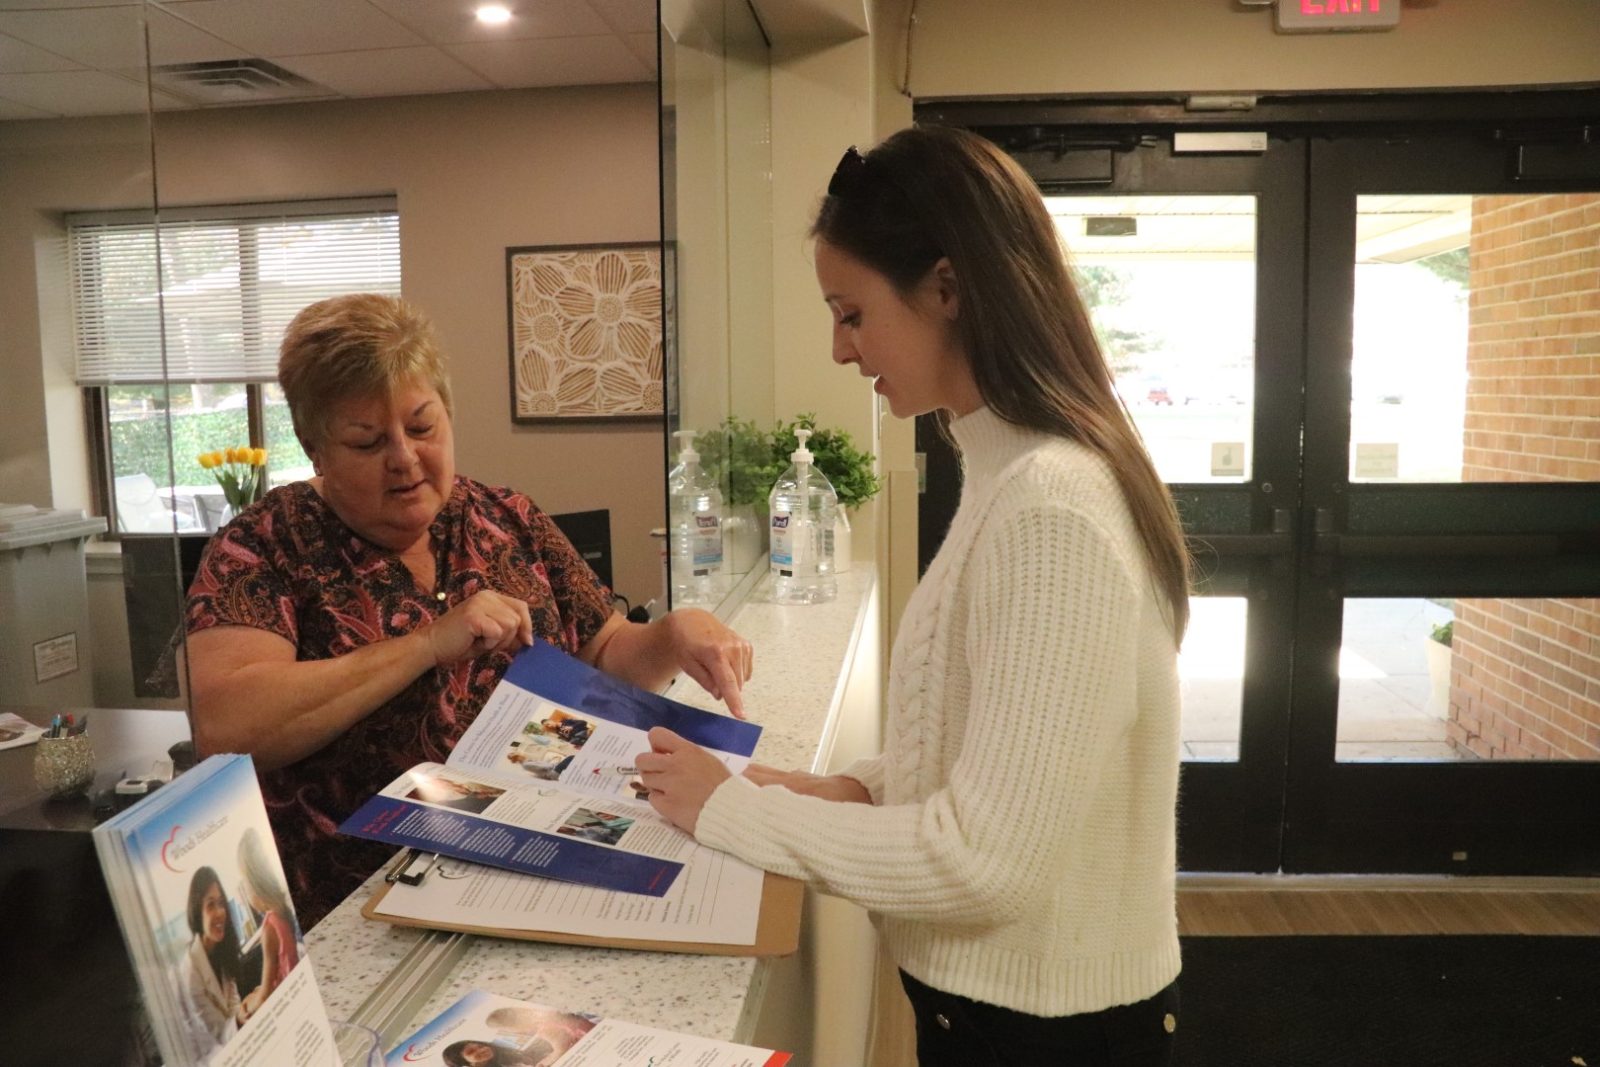 A female patient holding a pamphlet while speaking with receptionist at front desk.